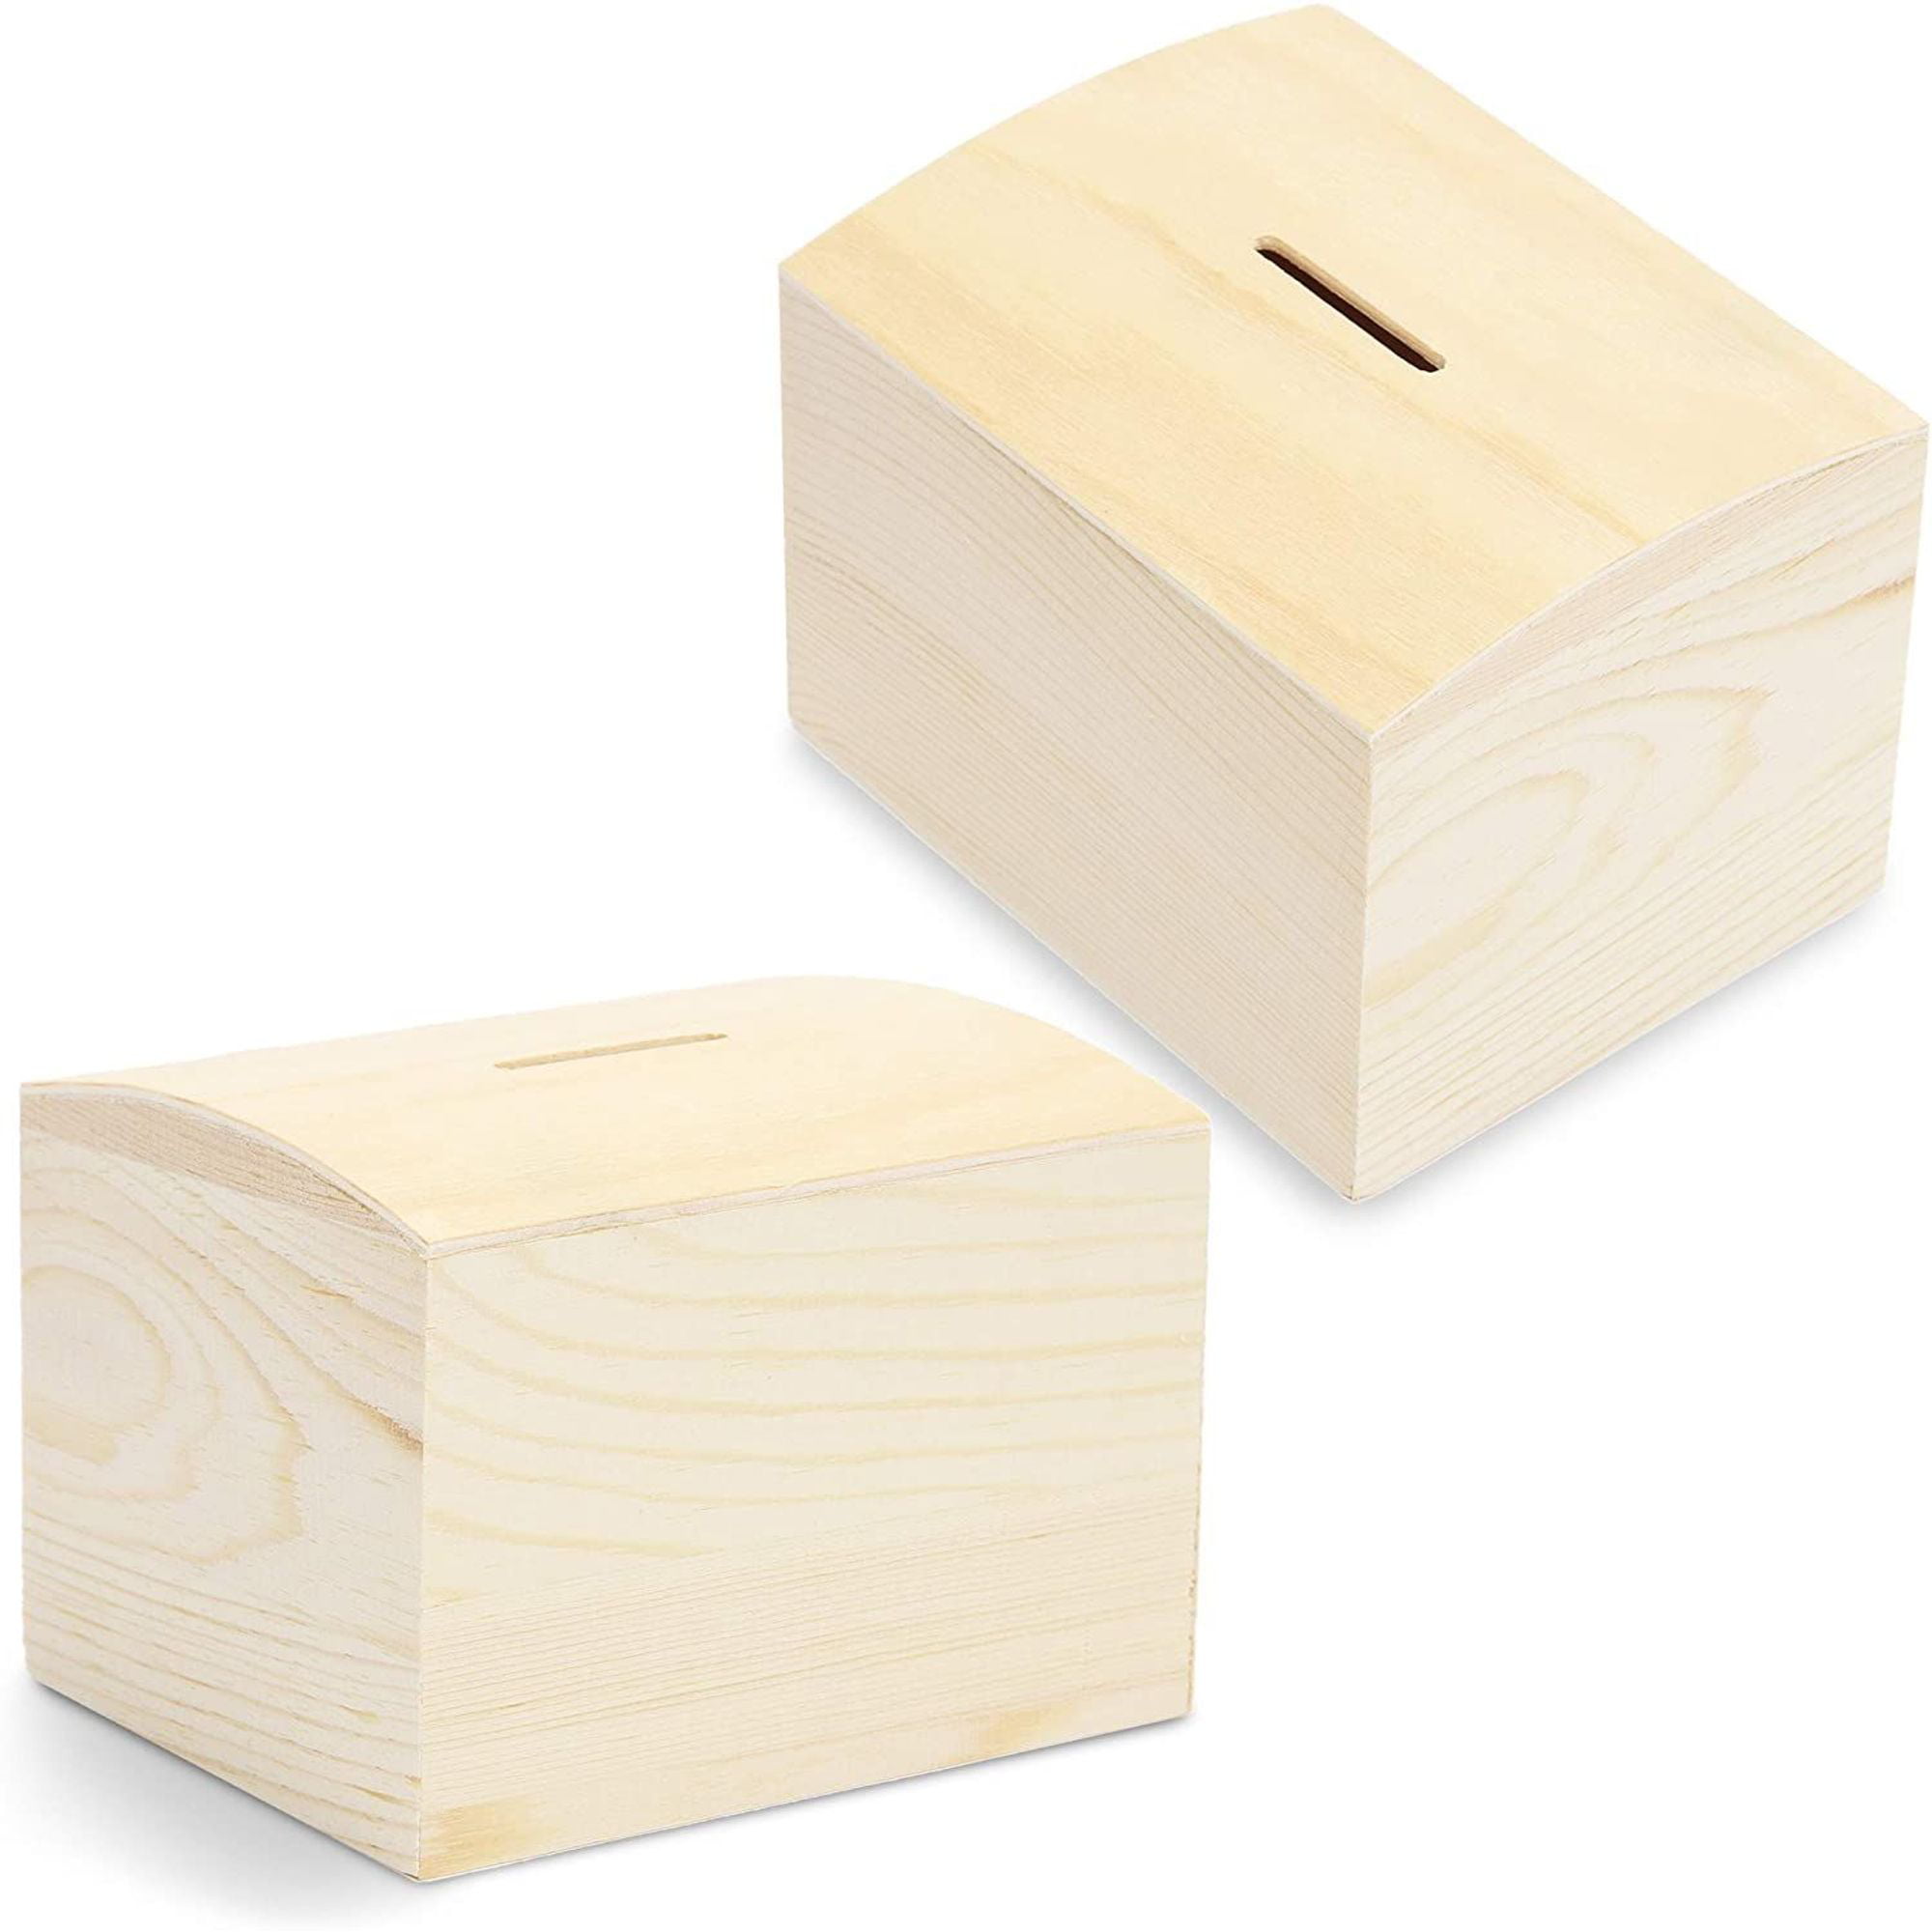 Unfinished Wooden Piggy Bank Boxes with Bottom Cap, 2 Pack 